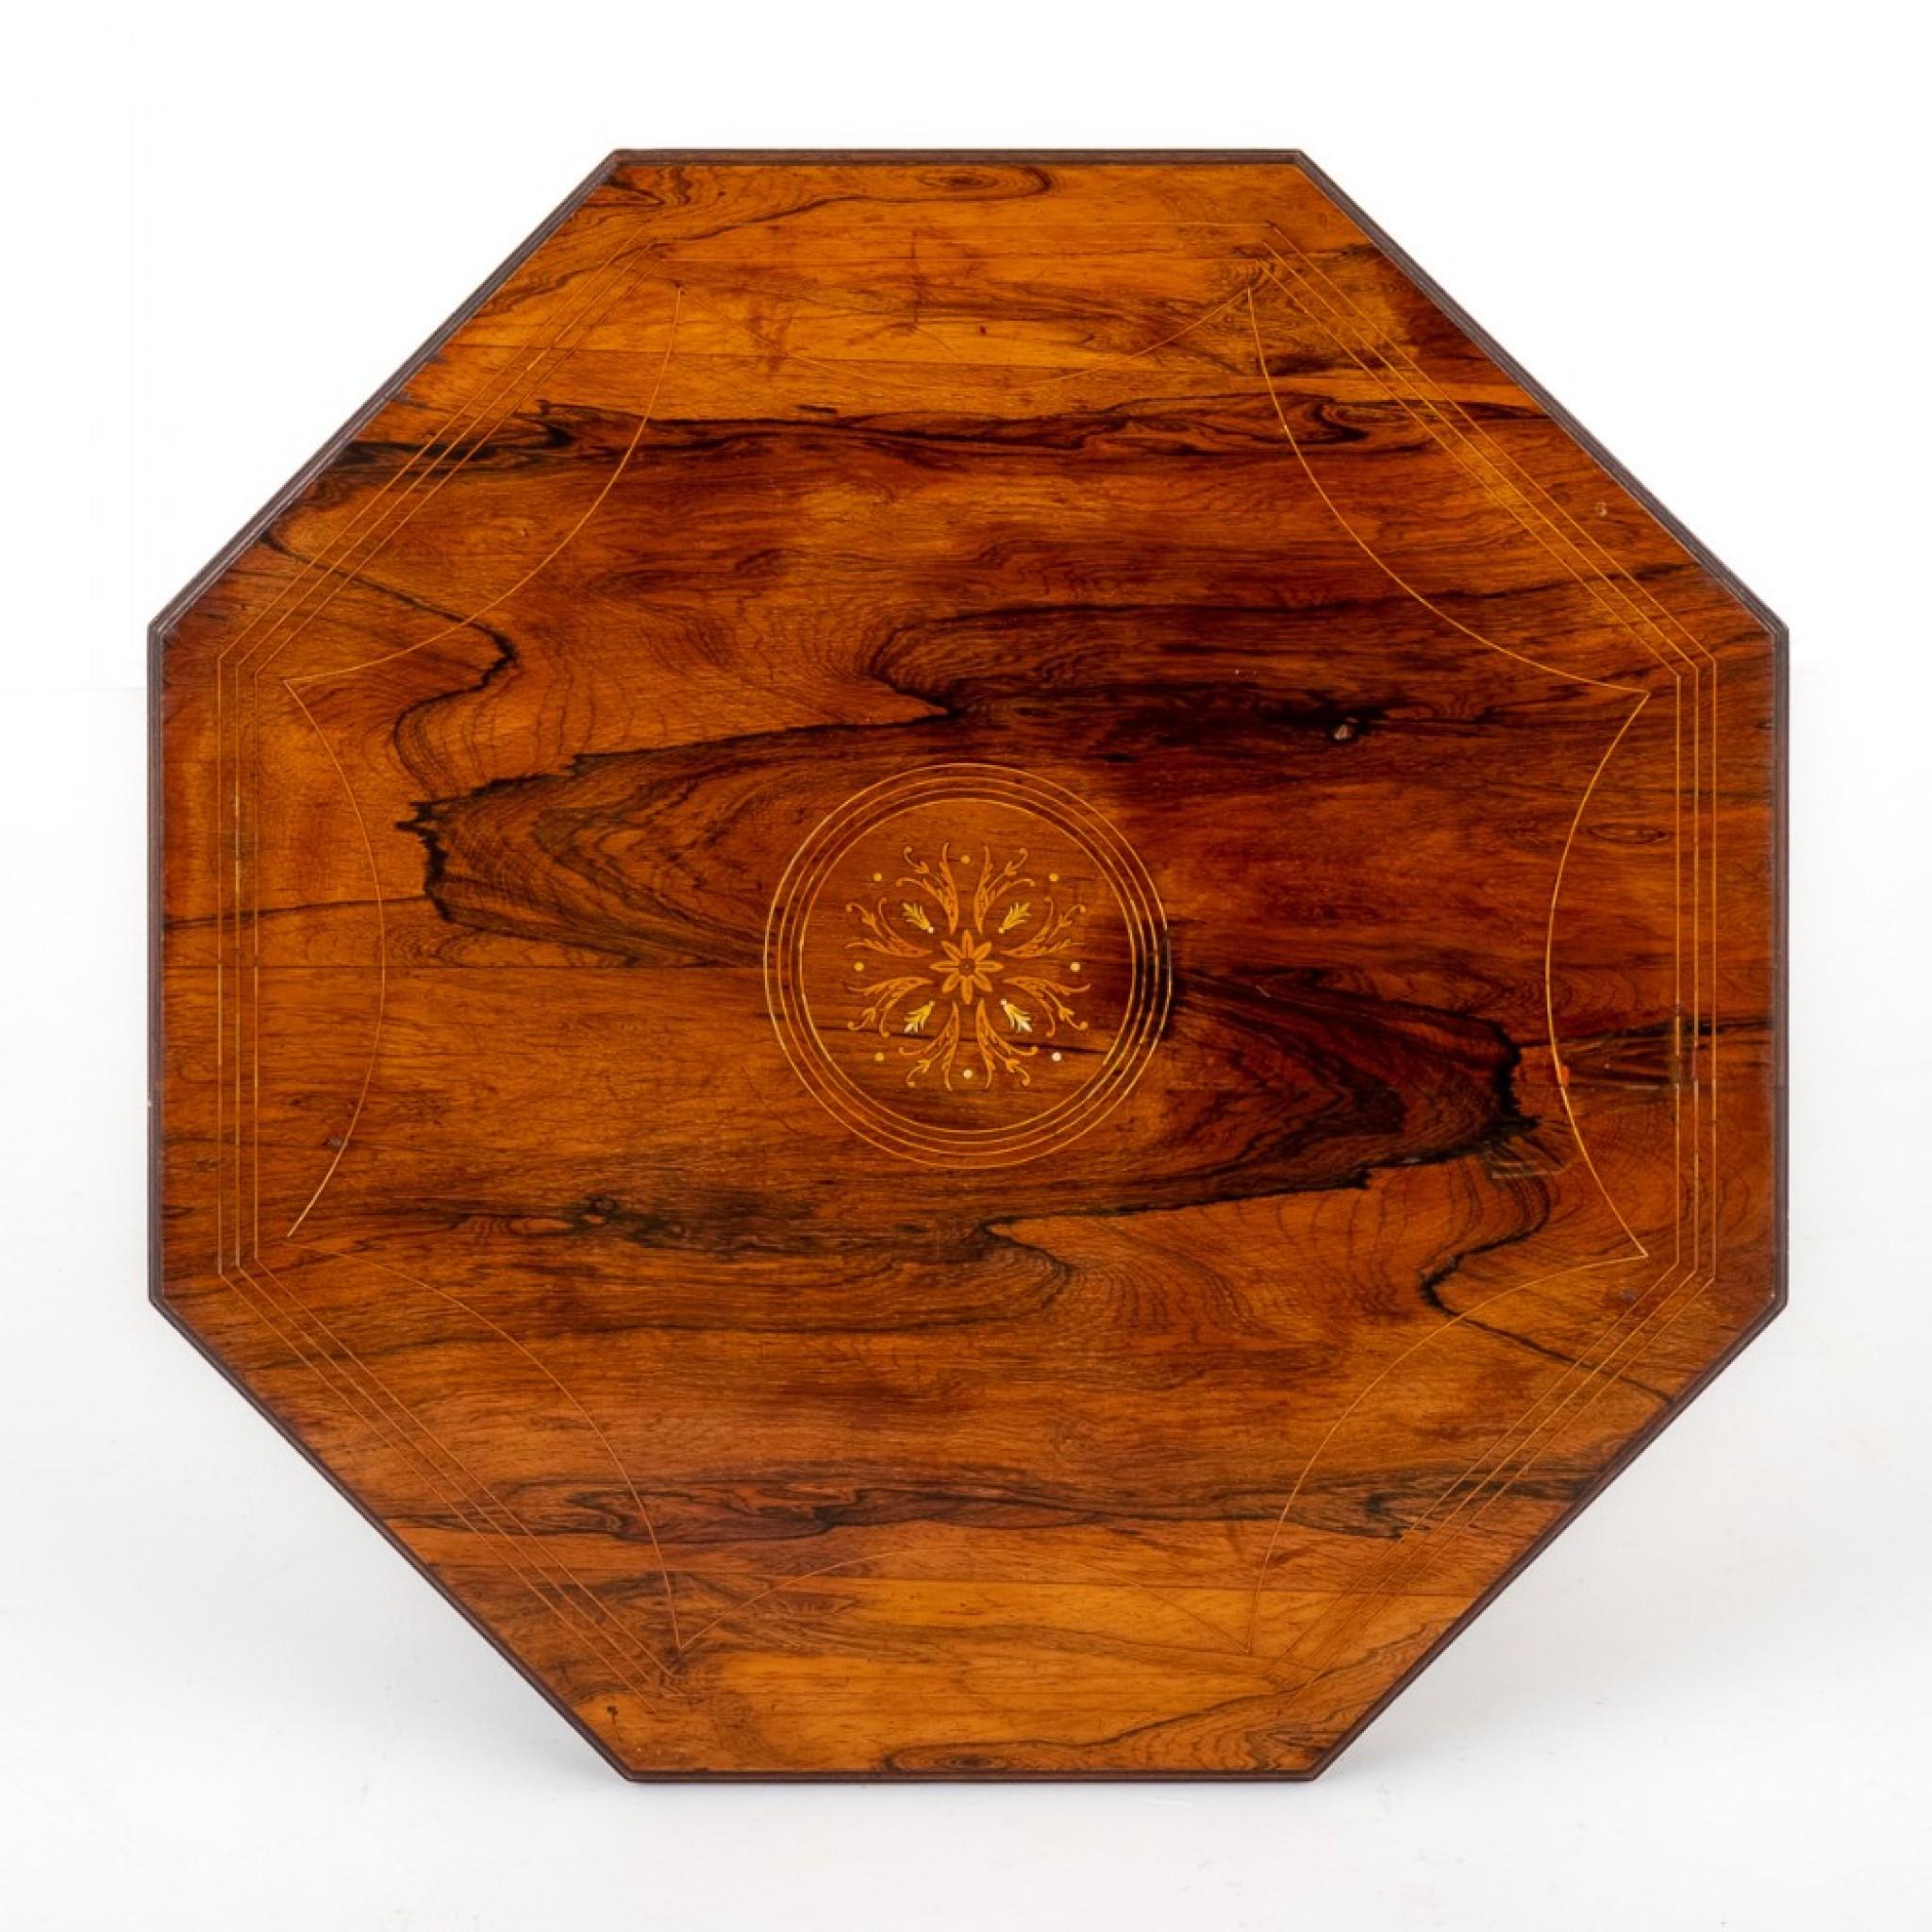 Write description here rosewood octagonal occasional table.
circa 1890.
Standing upon ring turned legs with a raised undertray.
The top of the table having central marquetry inlays with boxwood line inlays.
Size:
Height 28